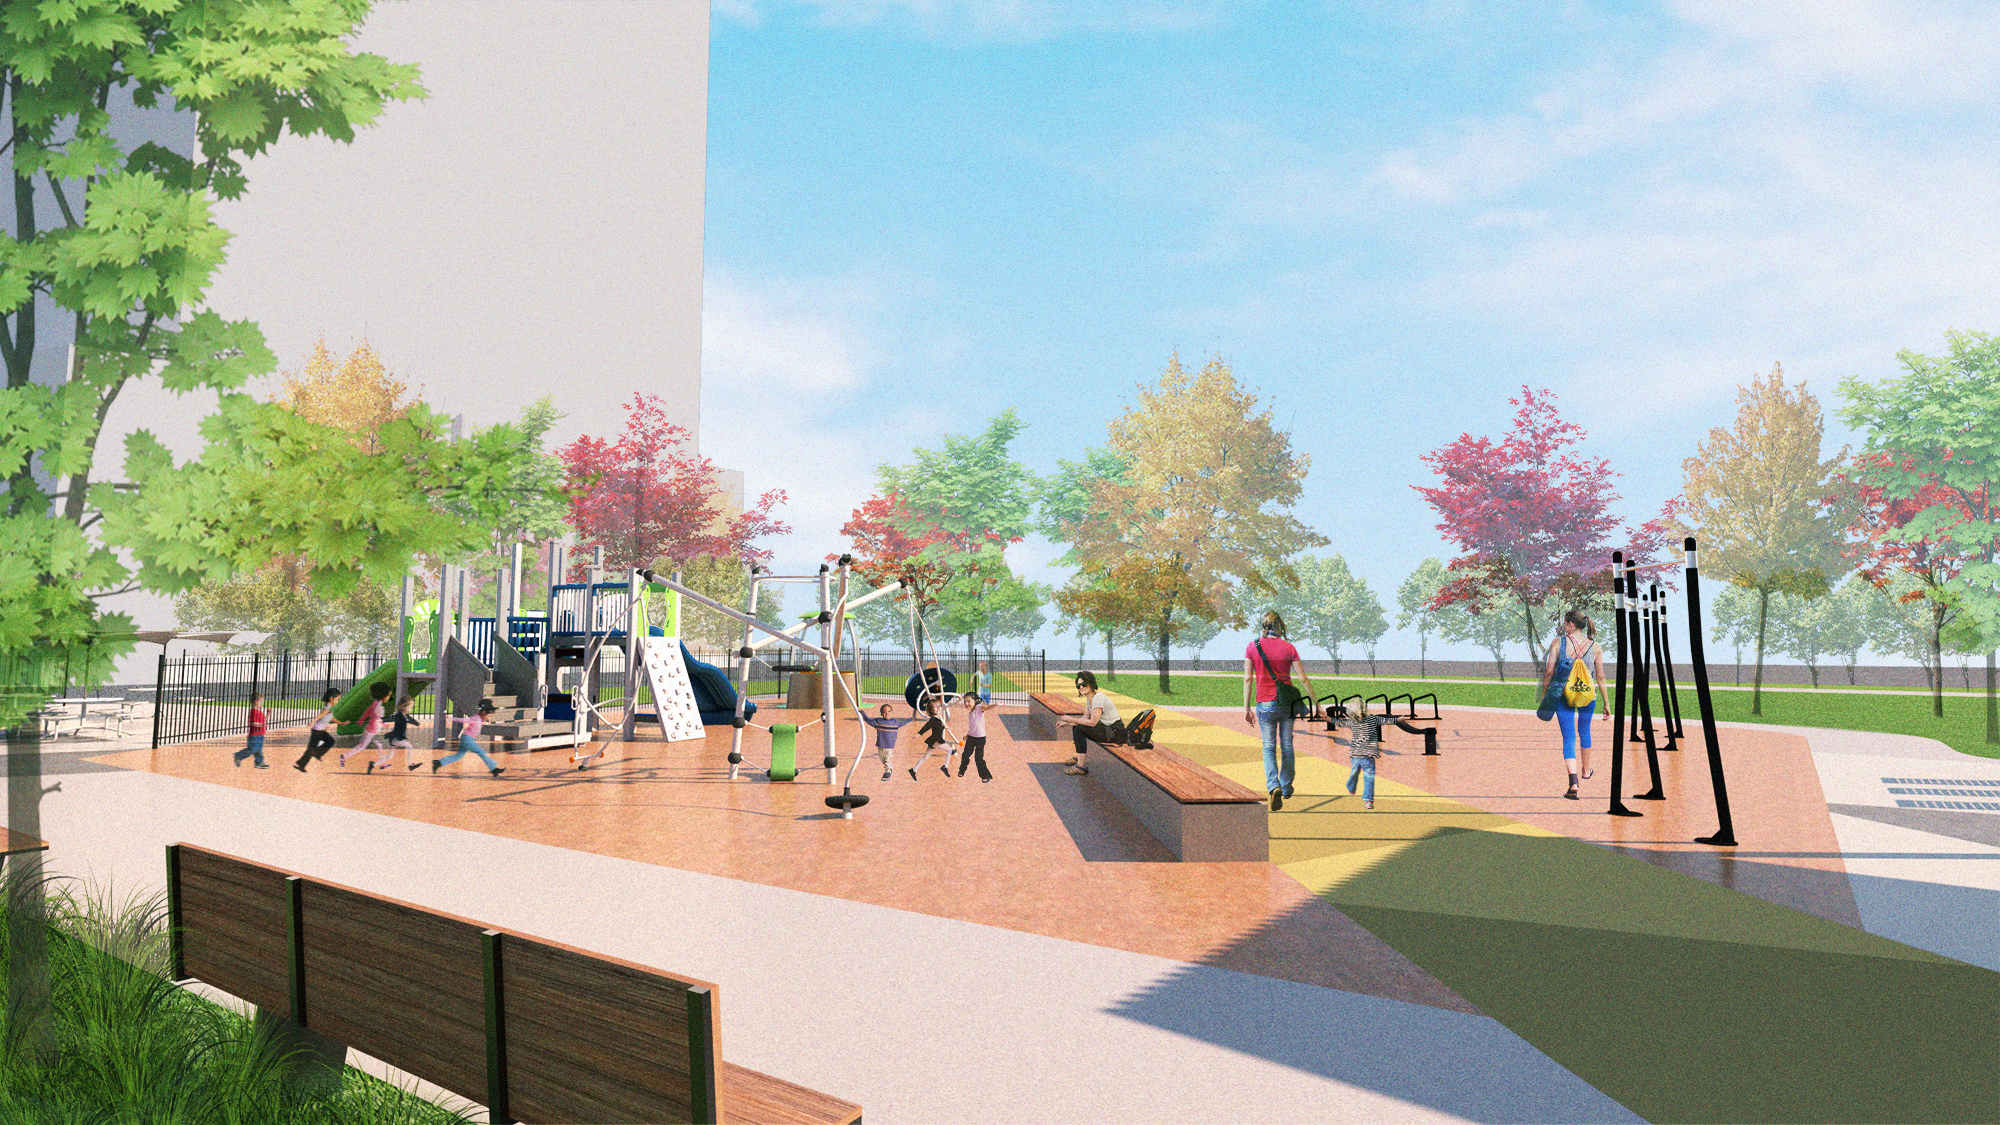 A rendering of the playground area and the associated equipment, with the connective walking paths. The image also shows the proposed fitness area, tree planting and seating areas facing the playground space for parents.